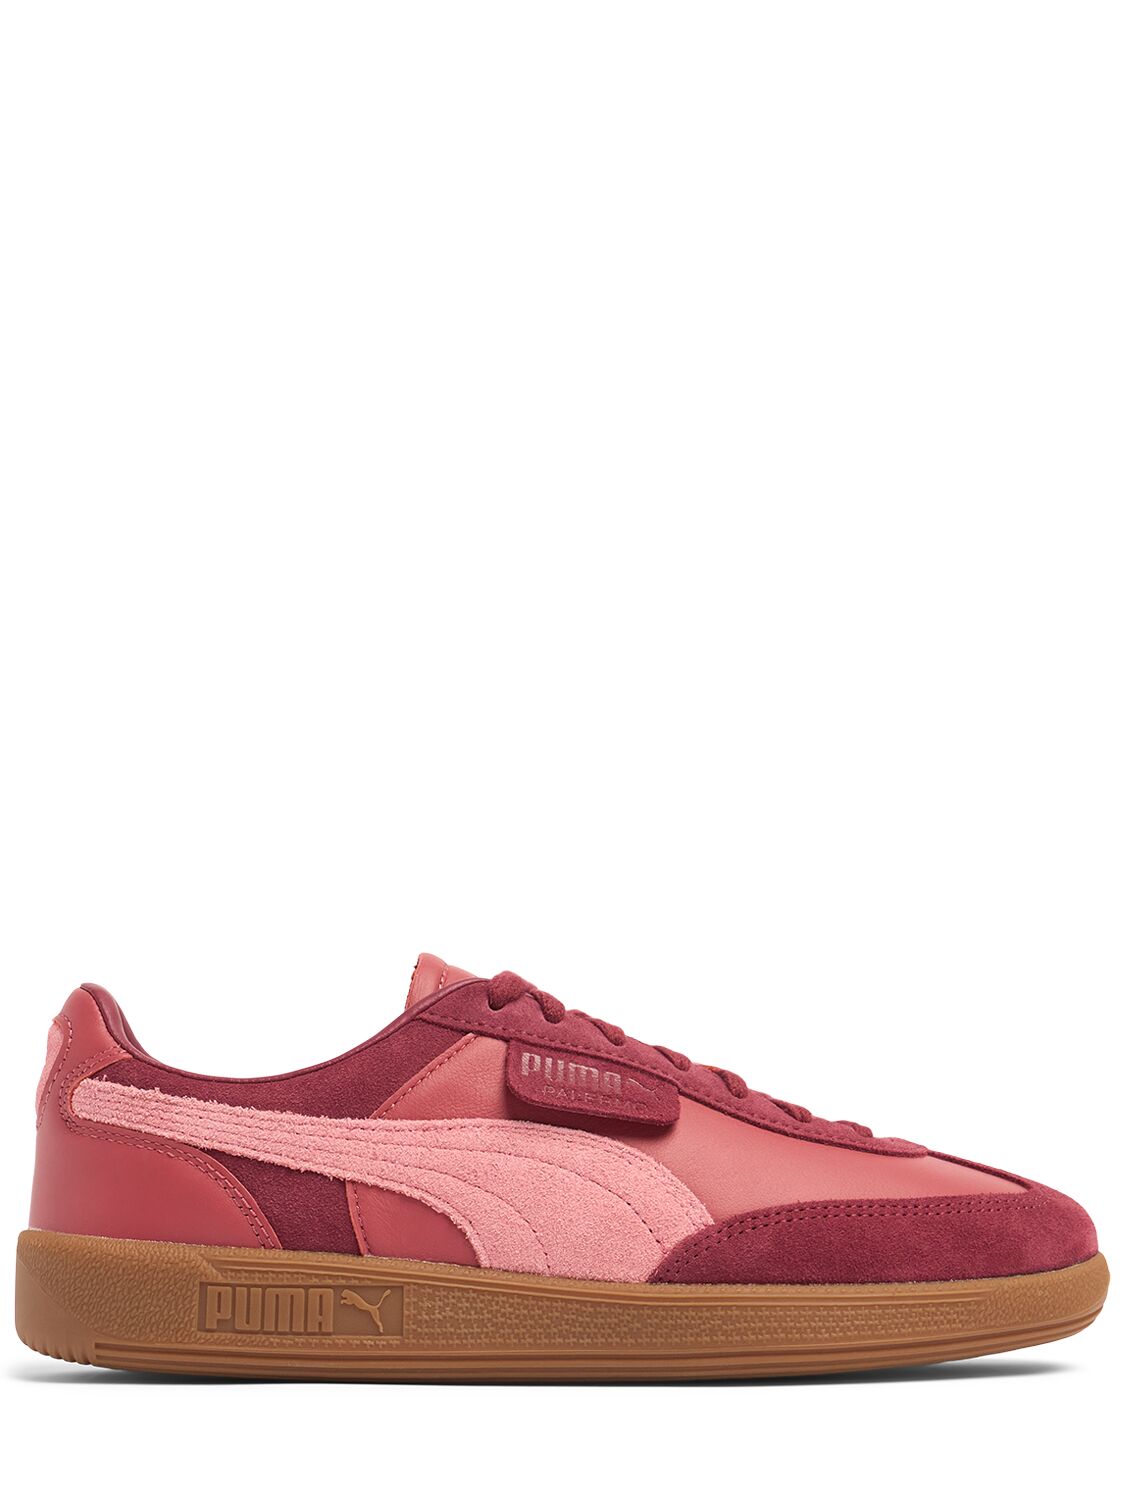 Puma Palermo Trainers In Red/pink